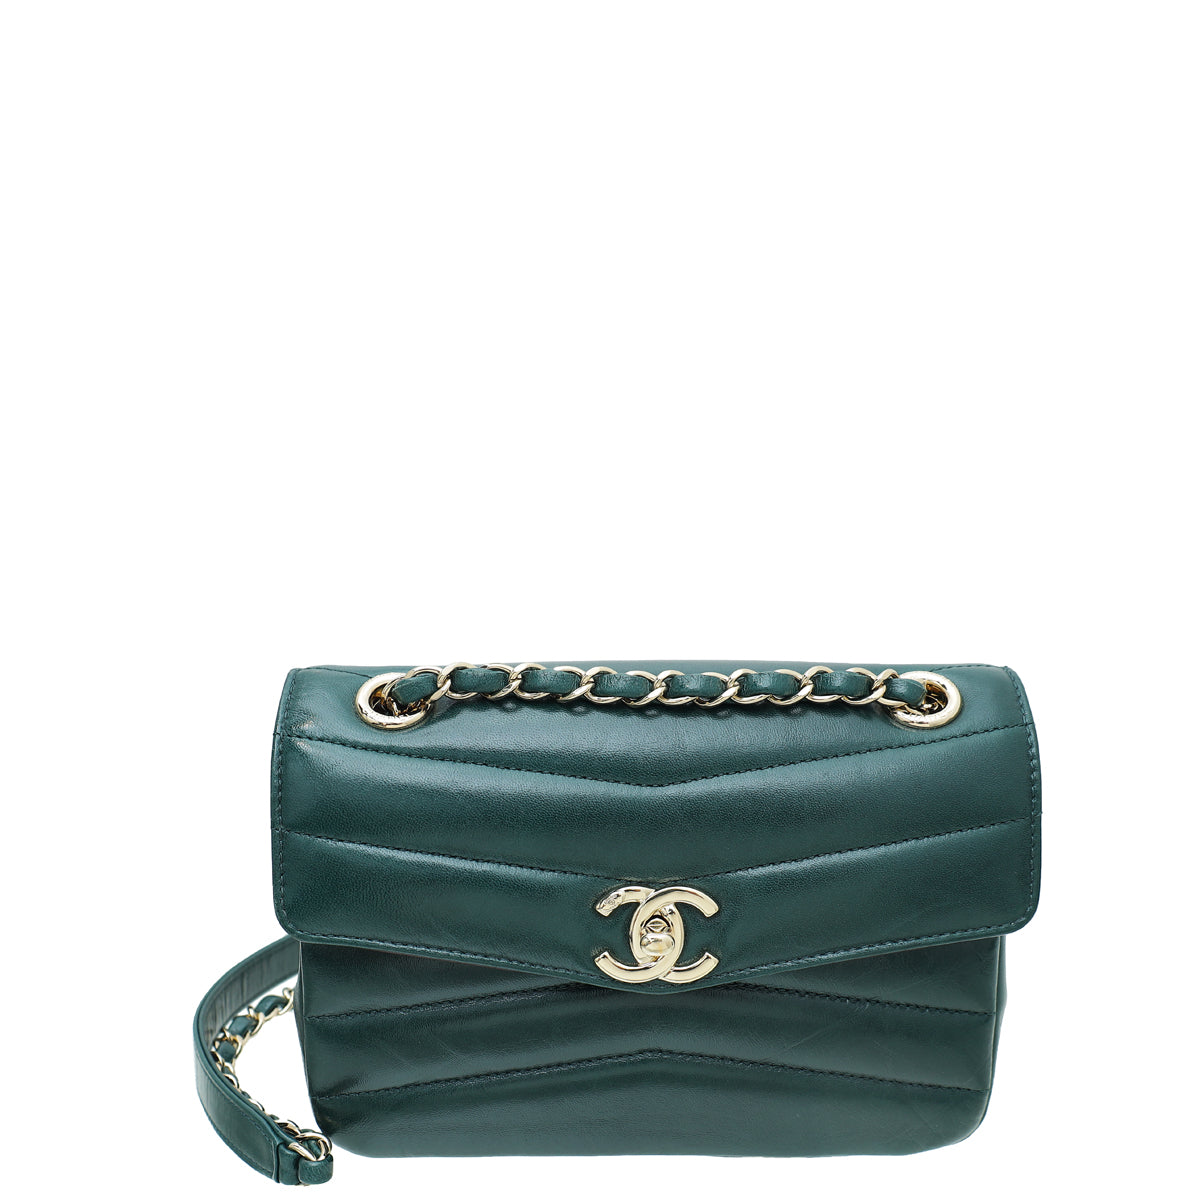 Chanel Forest Green Double Chevron Flap Bag